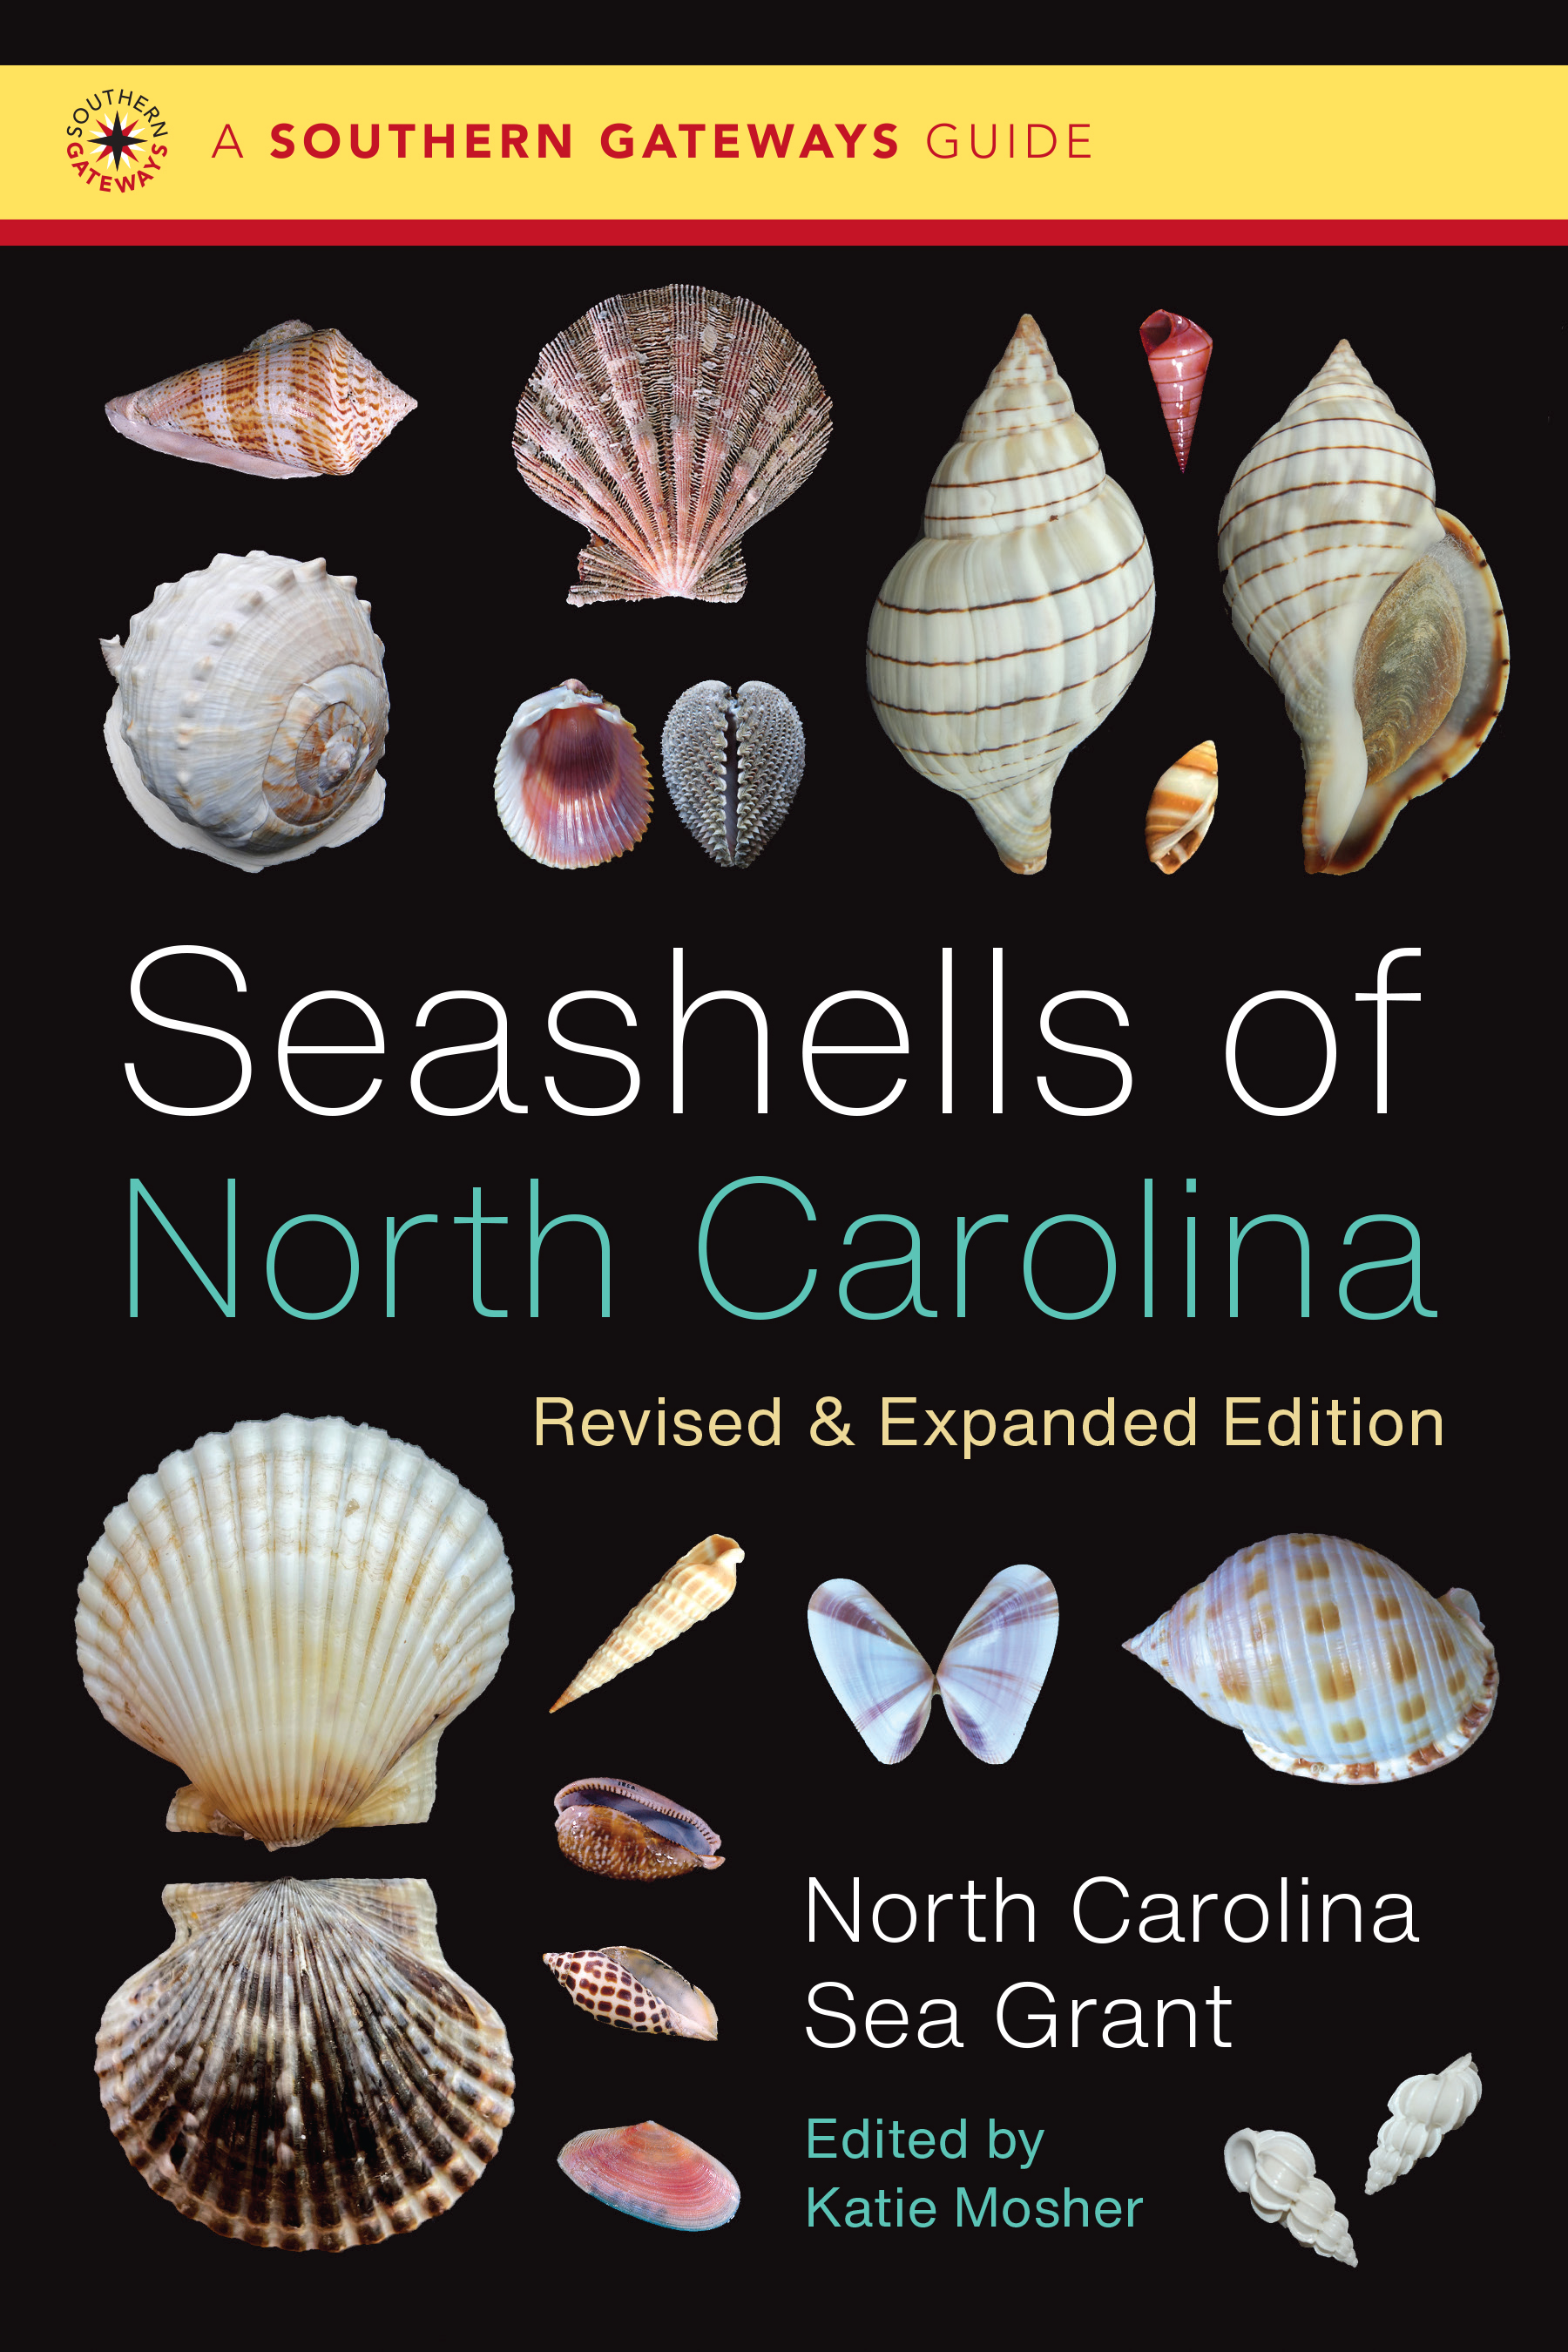 Cover of "Seashells of North Carolina" book featuring a range of different shells